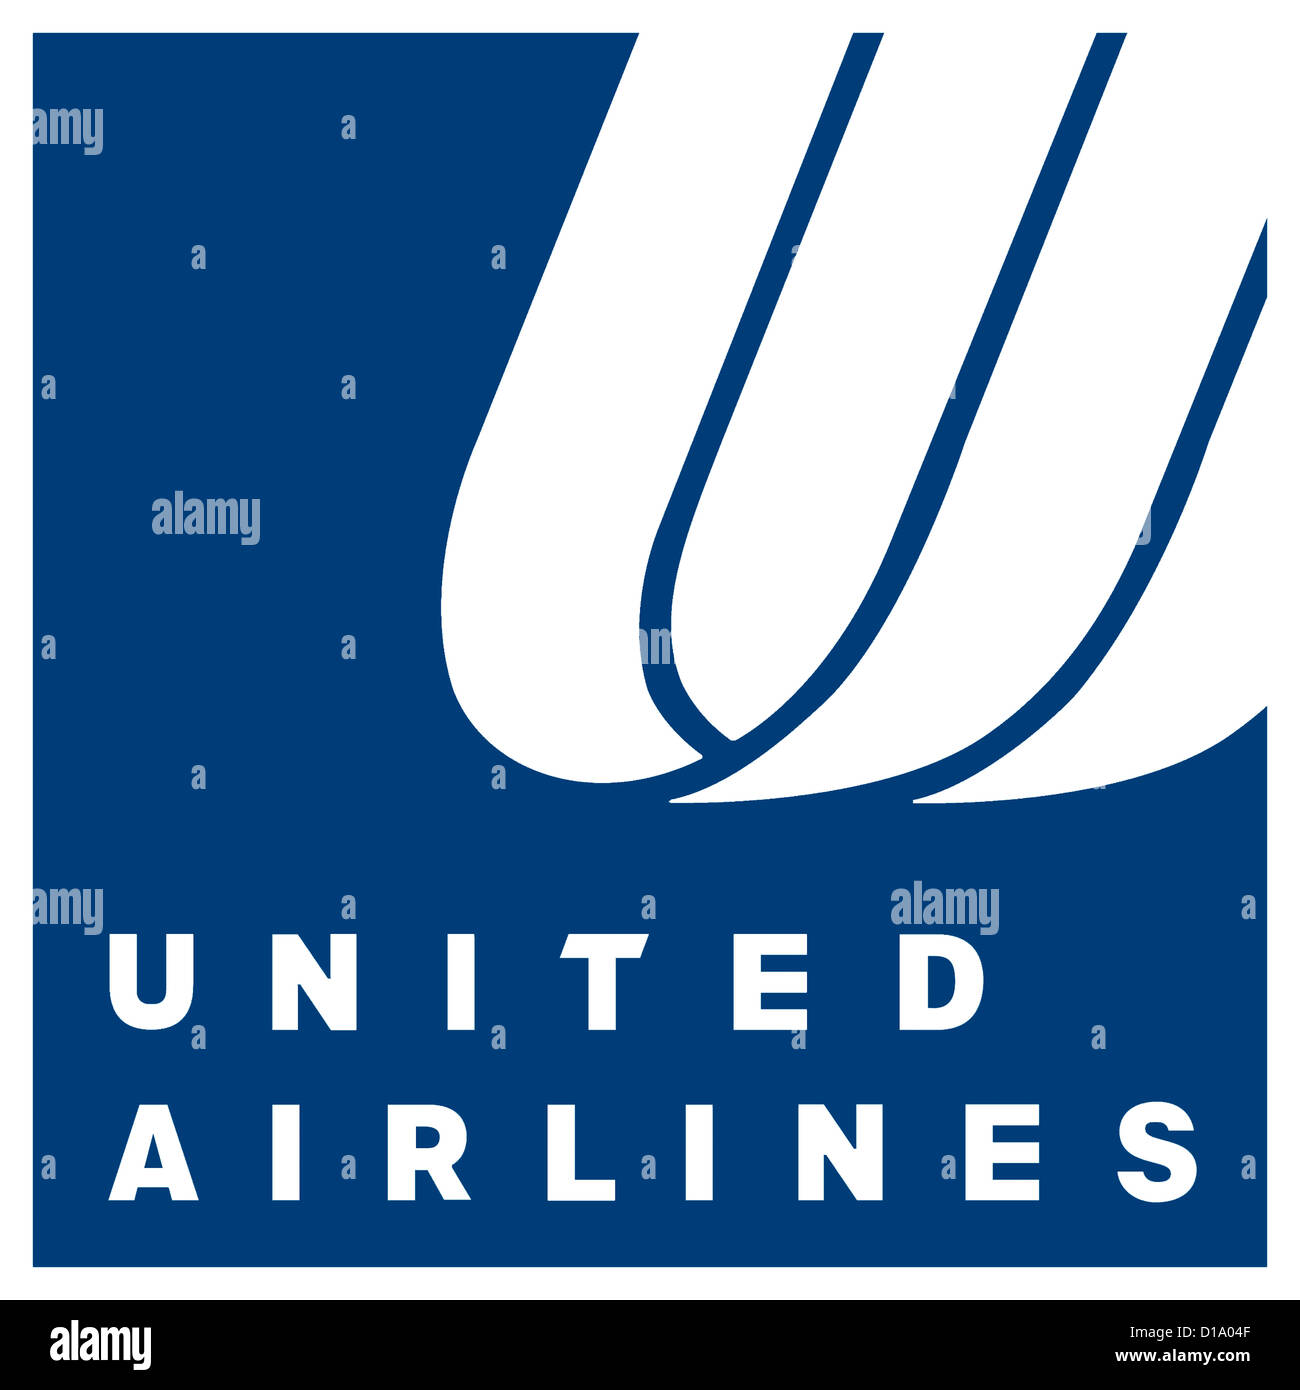 Logo the American airline company United Airlines with seat in Chicago. Stock Photo